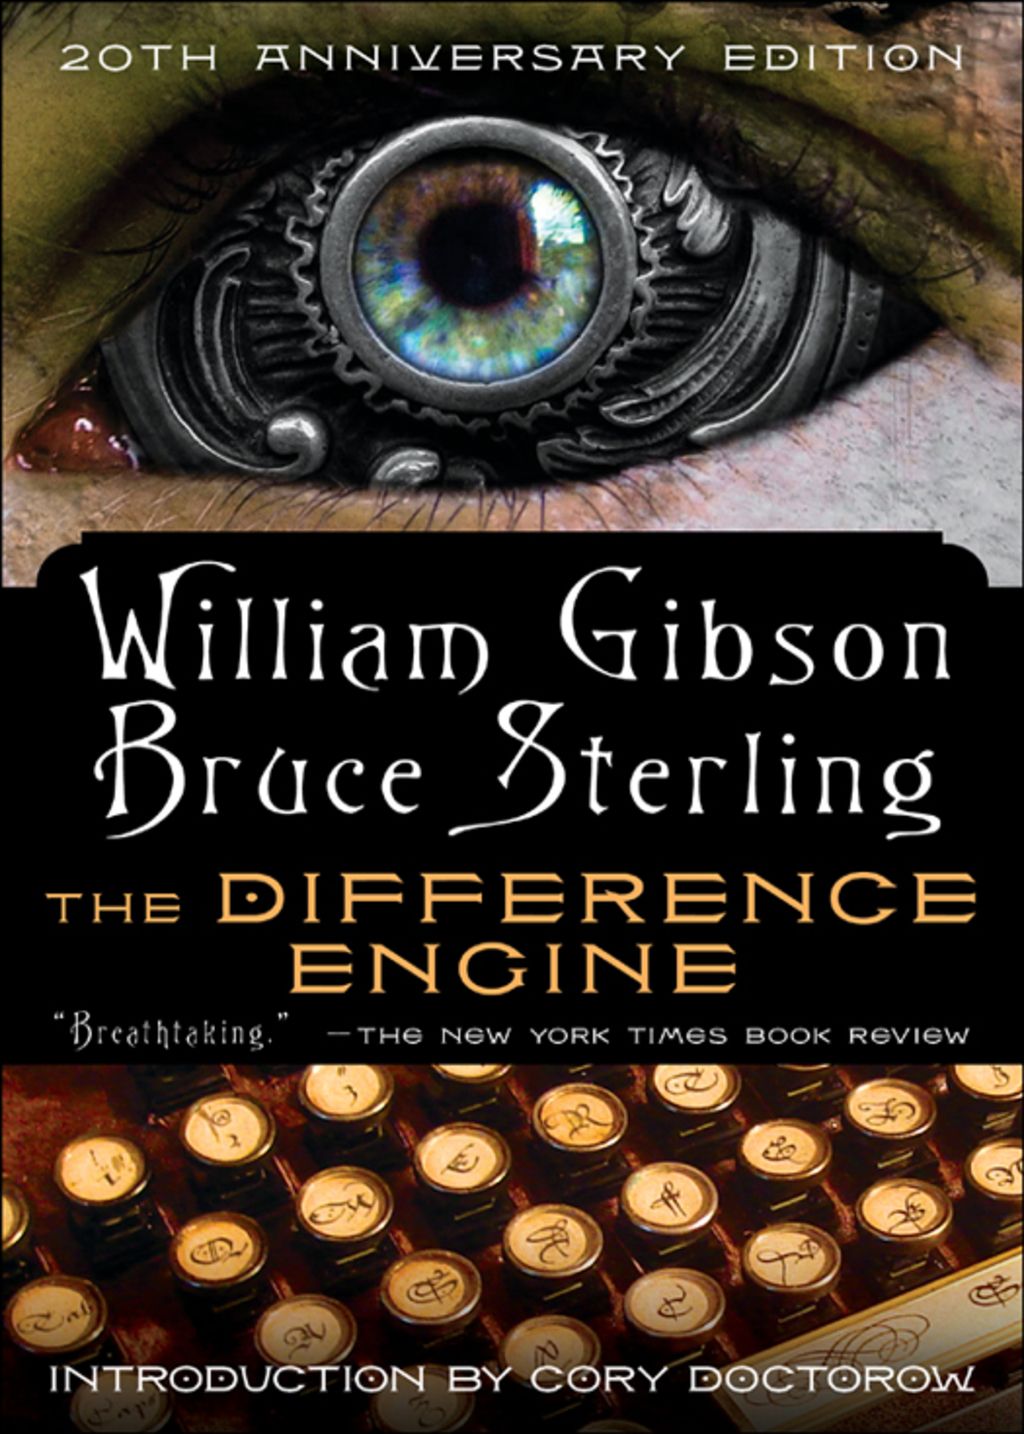 William Gibson: The difference engine (2003, Gollancz)